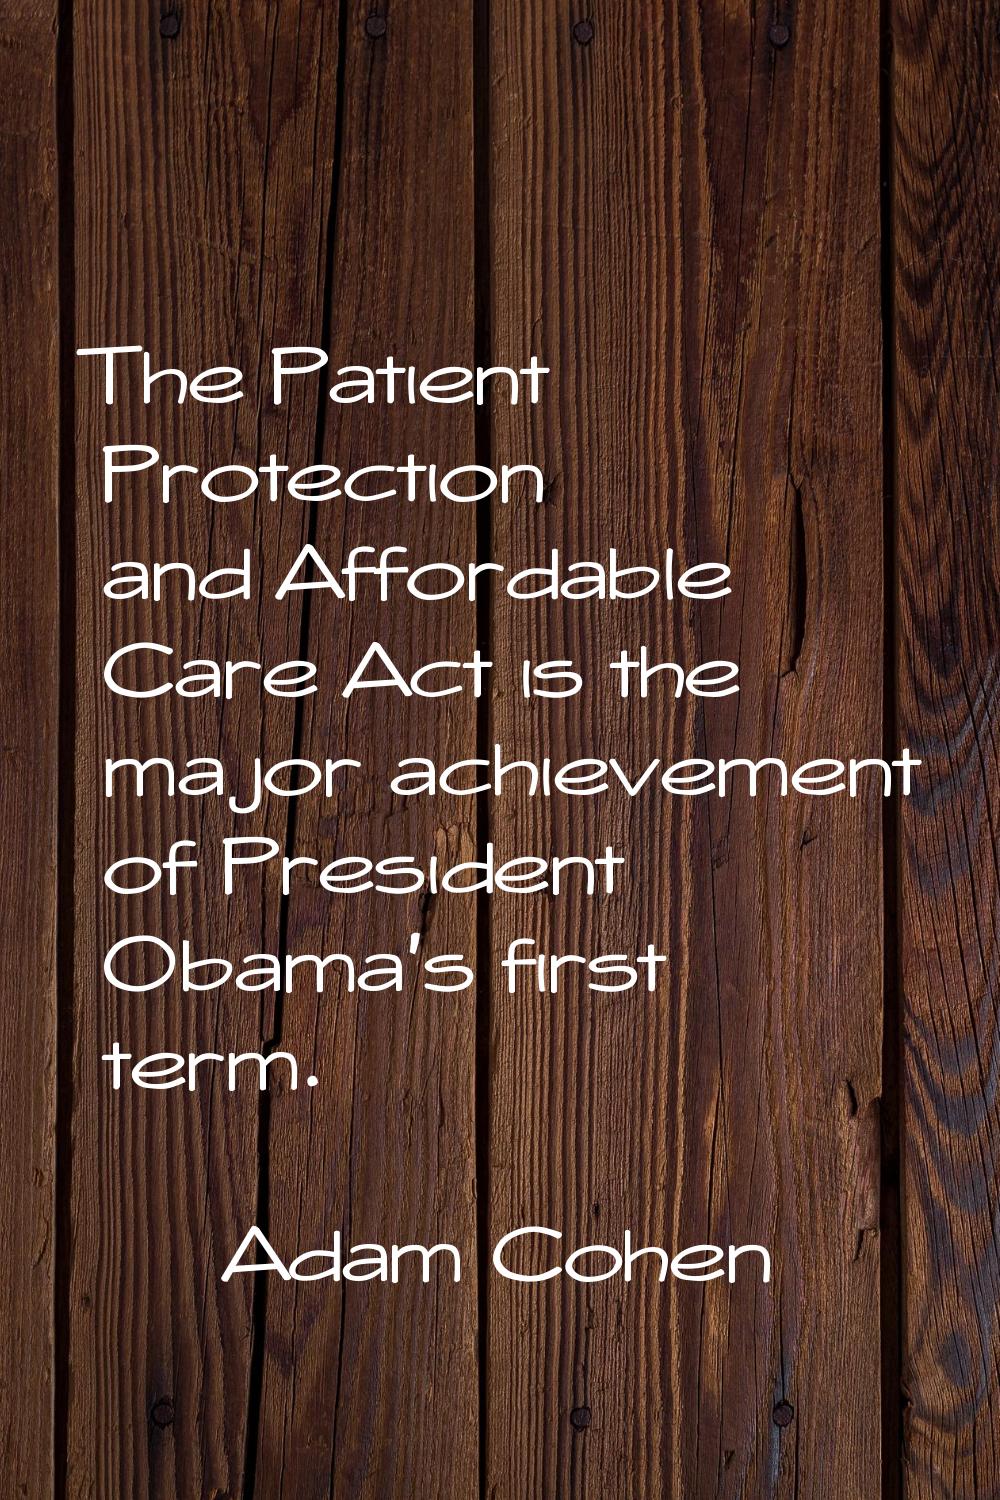 The Patient Protection and Affordable Care Act is the major achievement of President Obama's first 